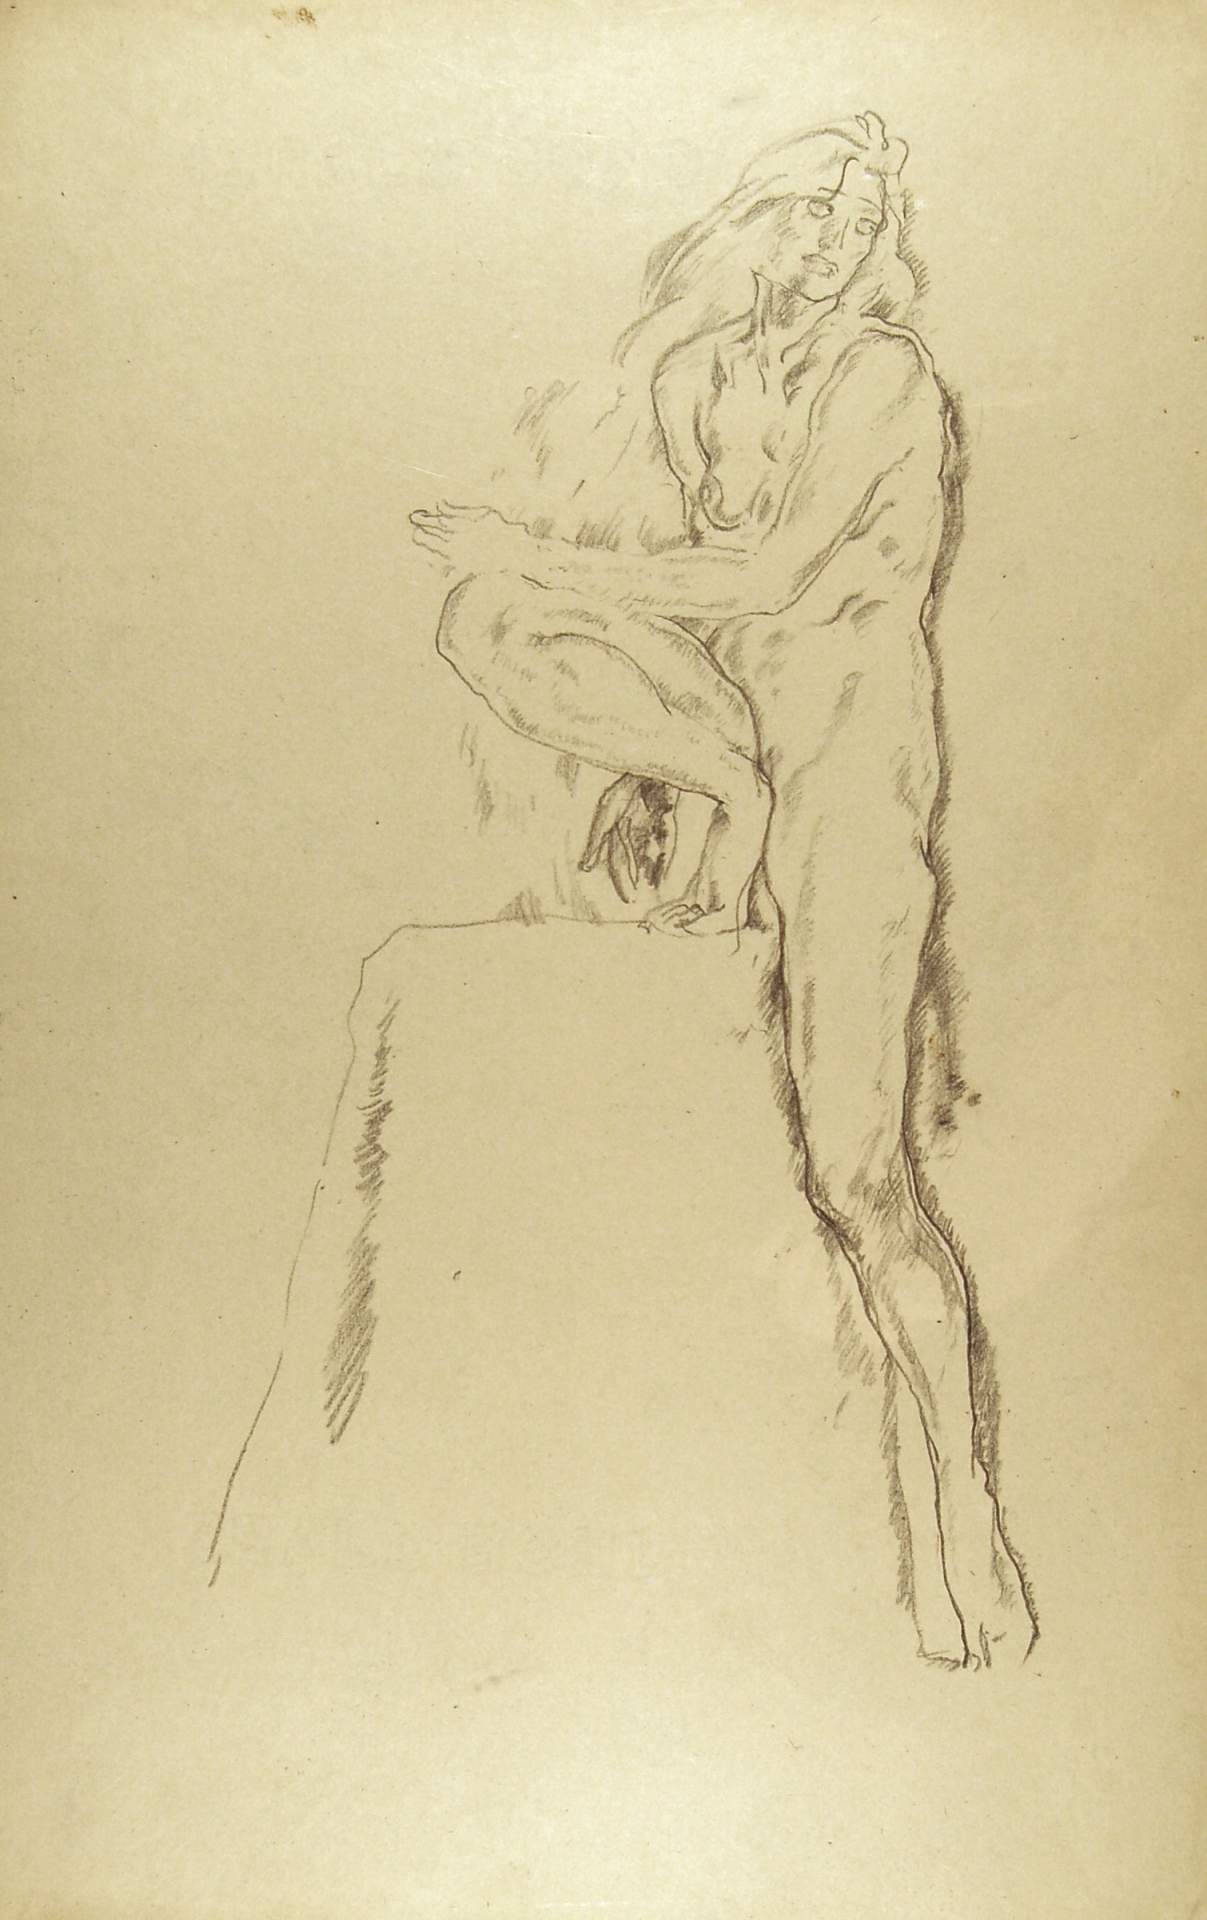 Female Nude Standing Next to Pedestal, Right Leg Bent Up with Foot on Pedestal, Left Arm on Right Leg